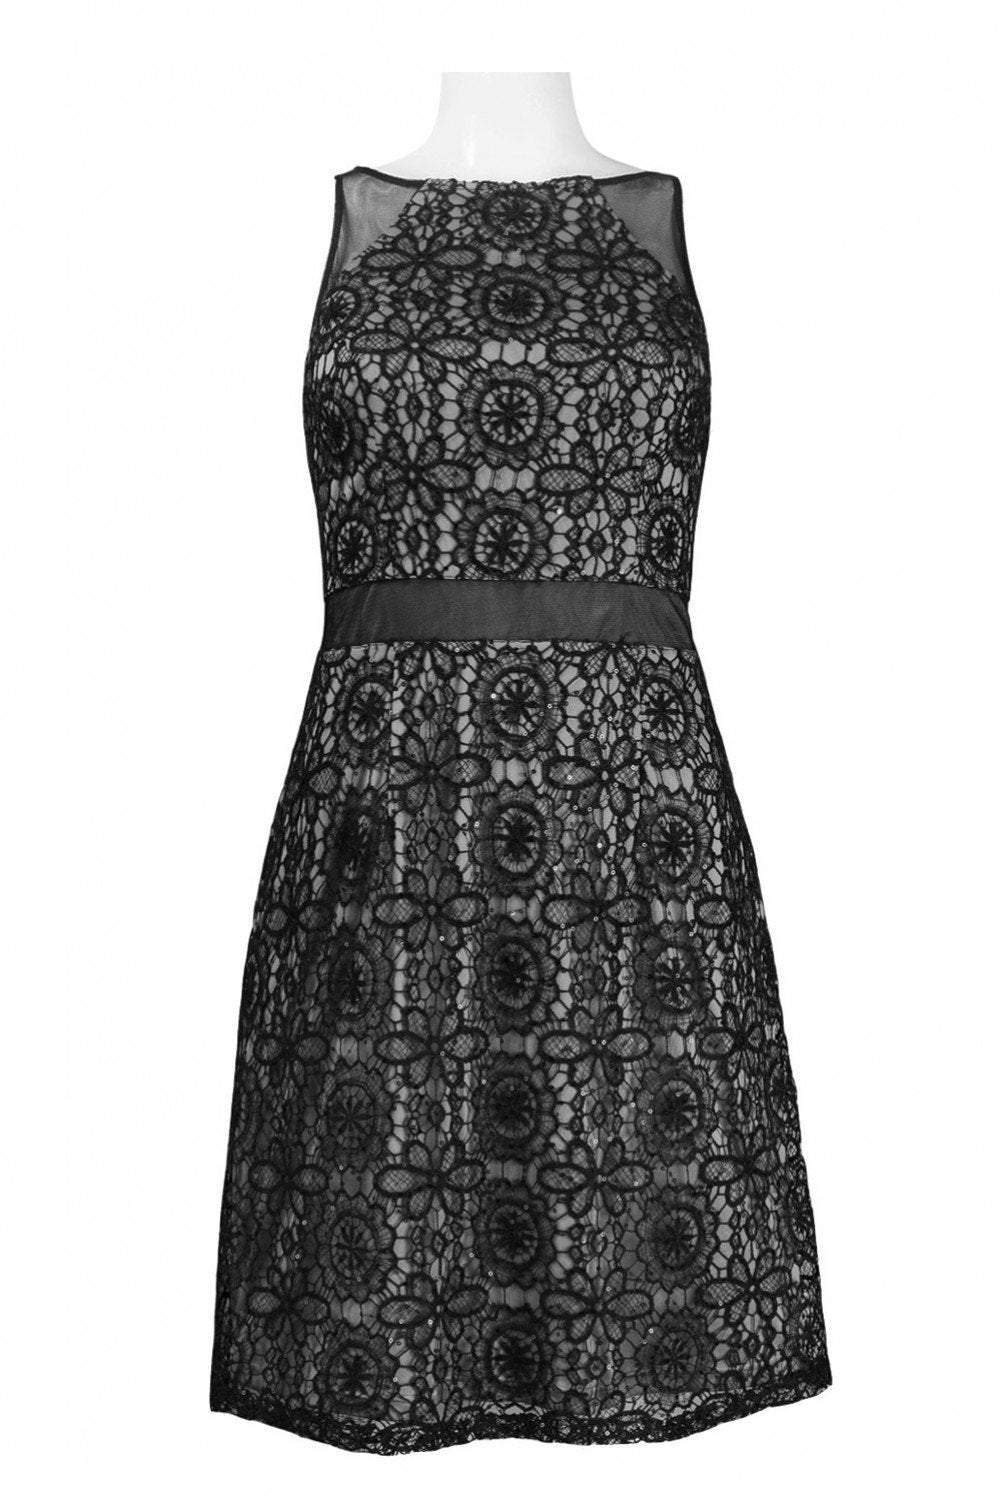 Adrianna Papell - 41908460 Sheer Accented Floral Crochet Lace Dress In Black and Silver